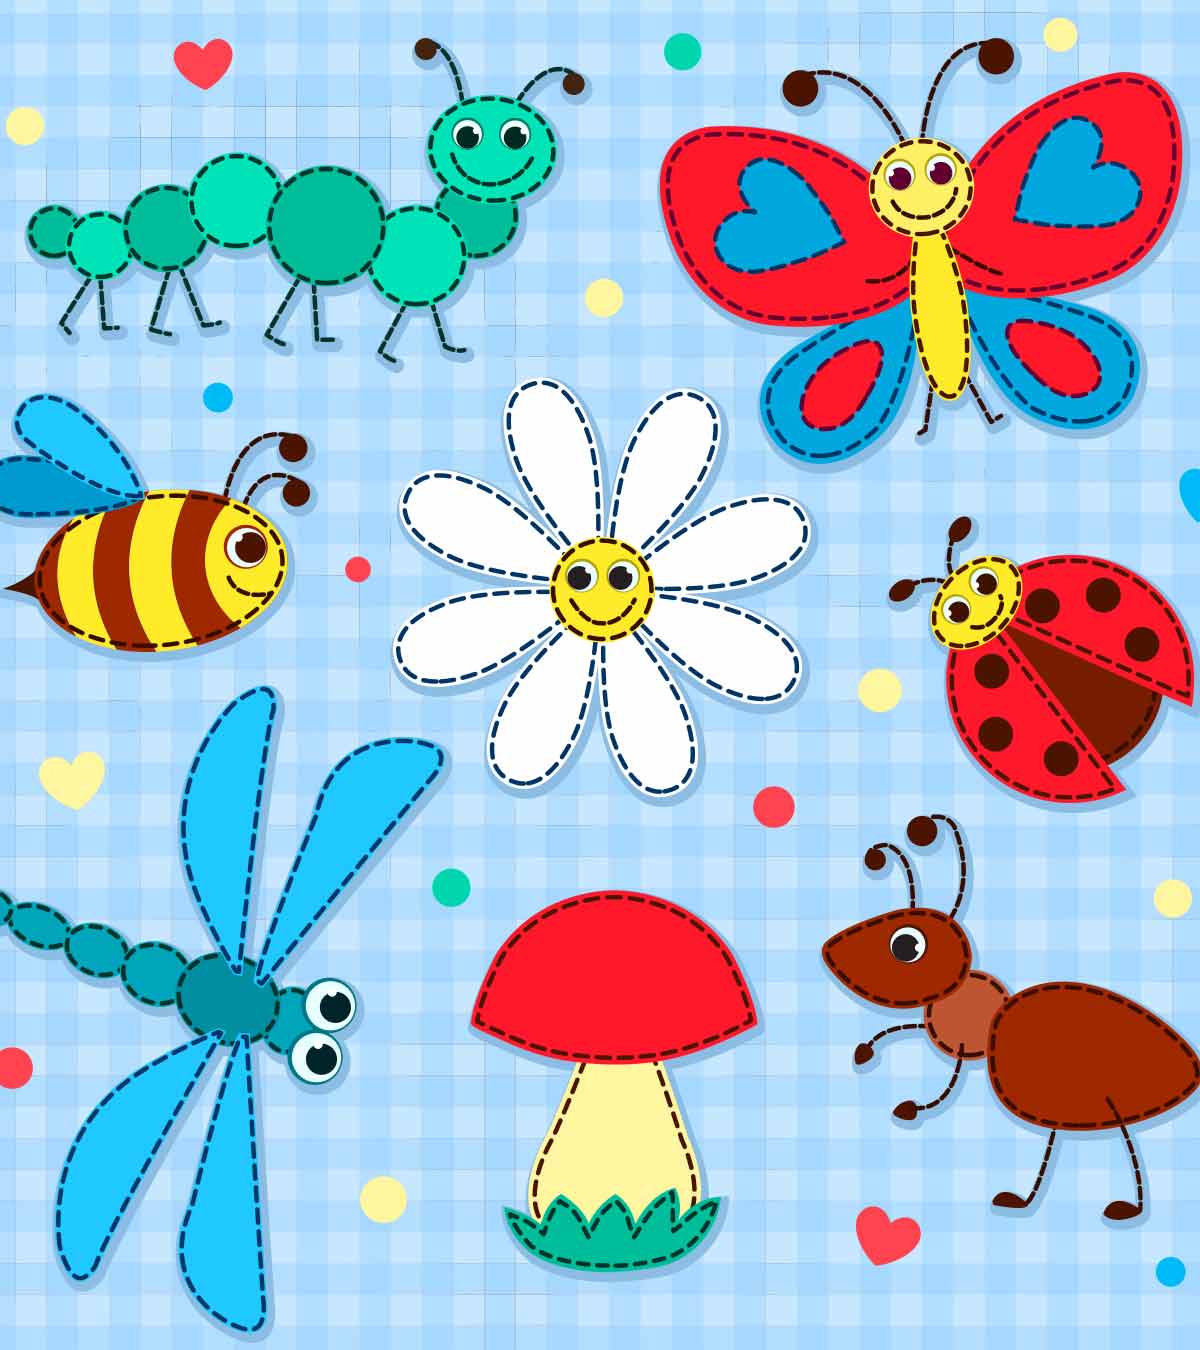 10 Creative Insect And Bug Crafts For Kids, With Images